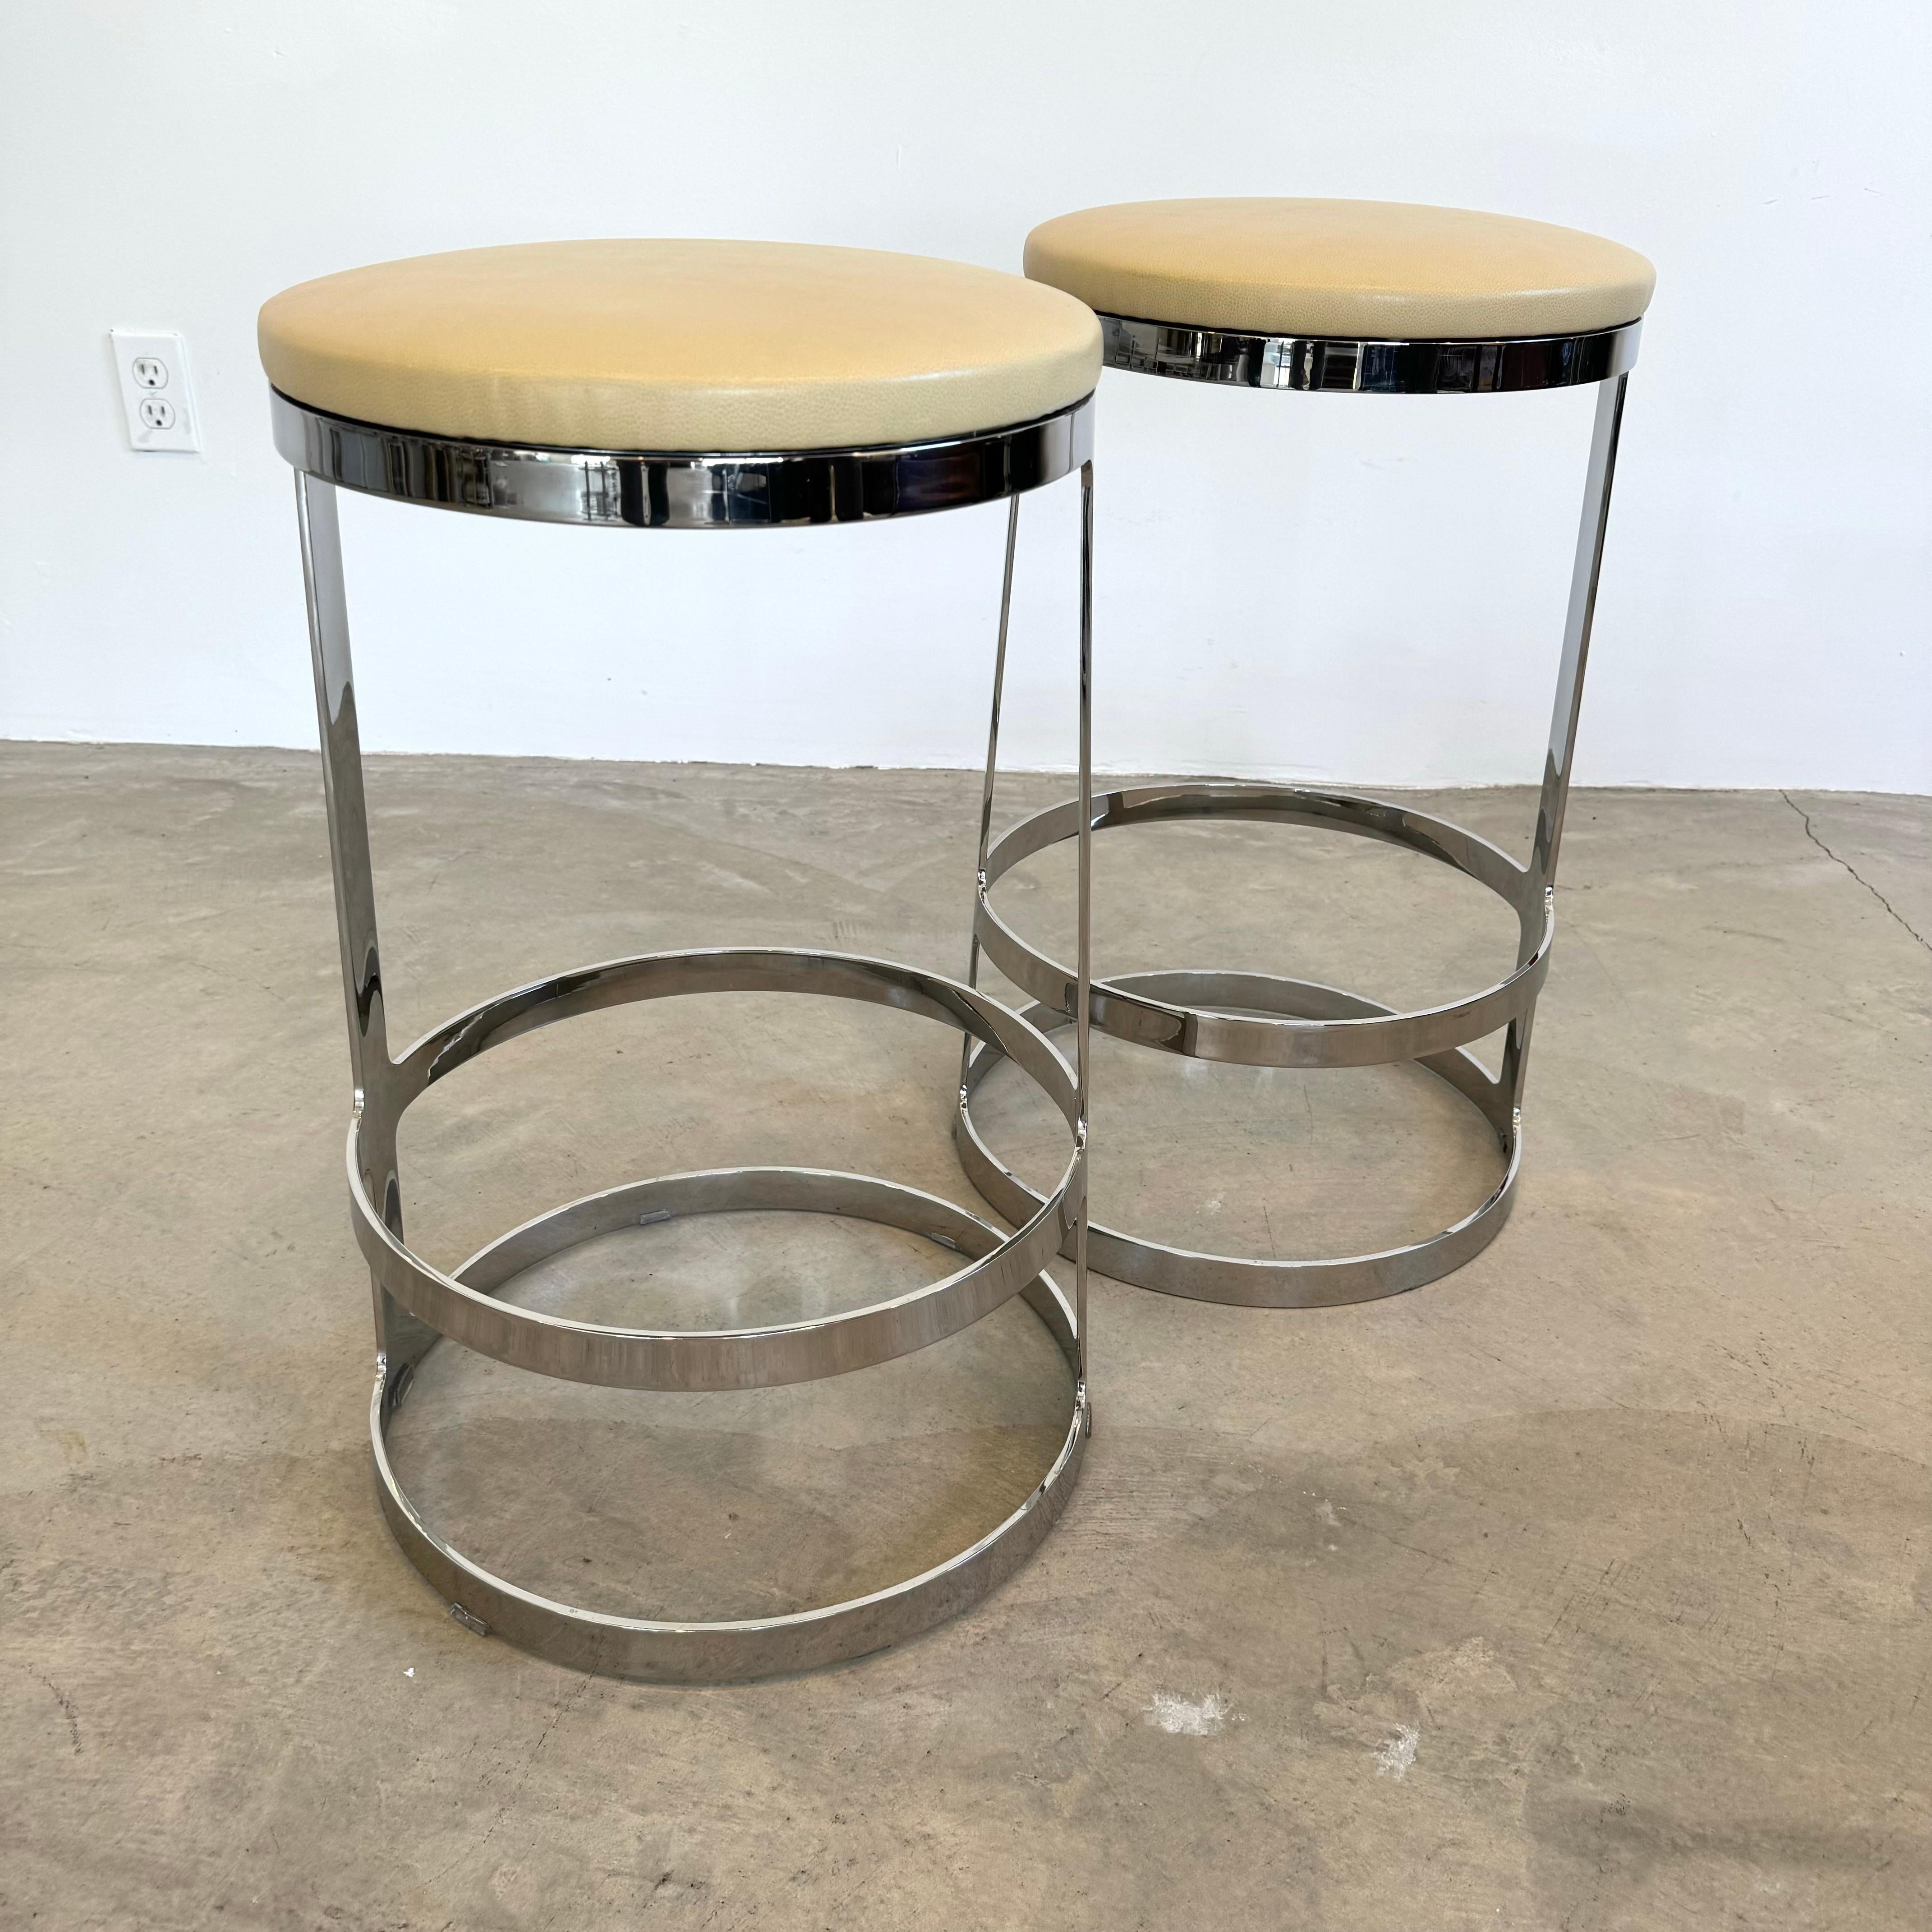 Set of Three Polished Steel and Leather Swivel Counter Stools, 2000s USA For Sale 8